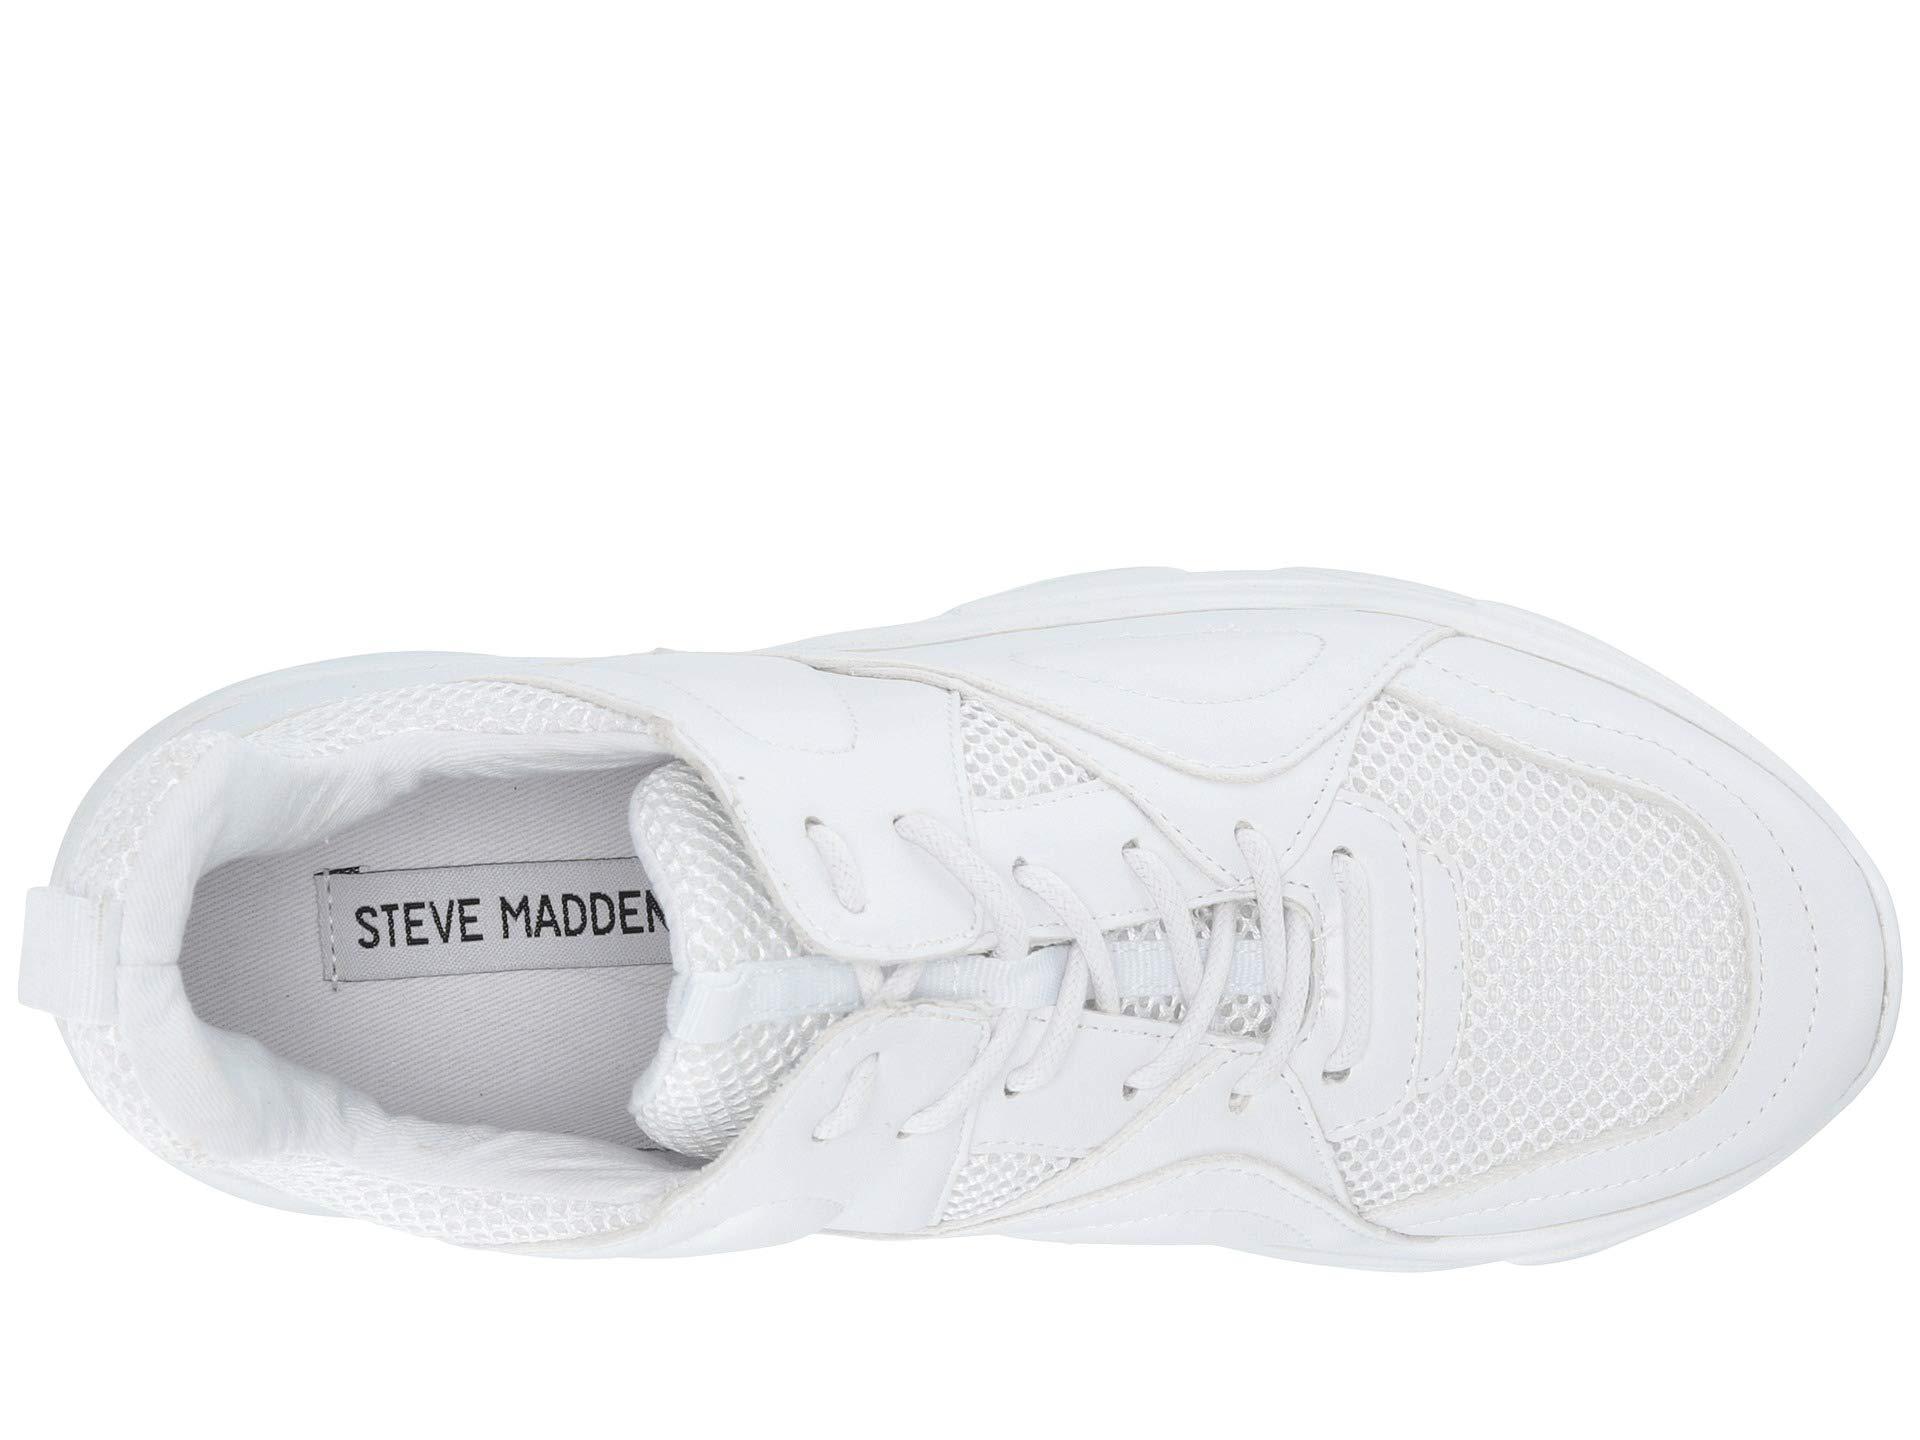 Steve Madden Leather Movement Sneakers in White - Lyst